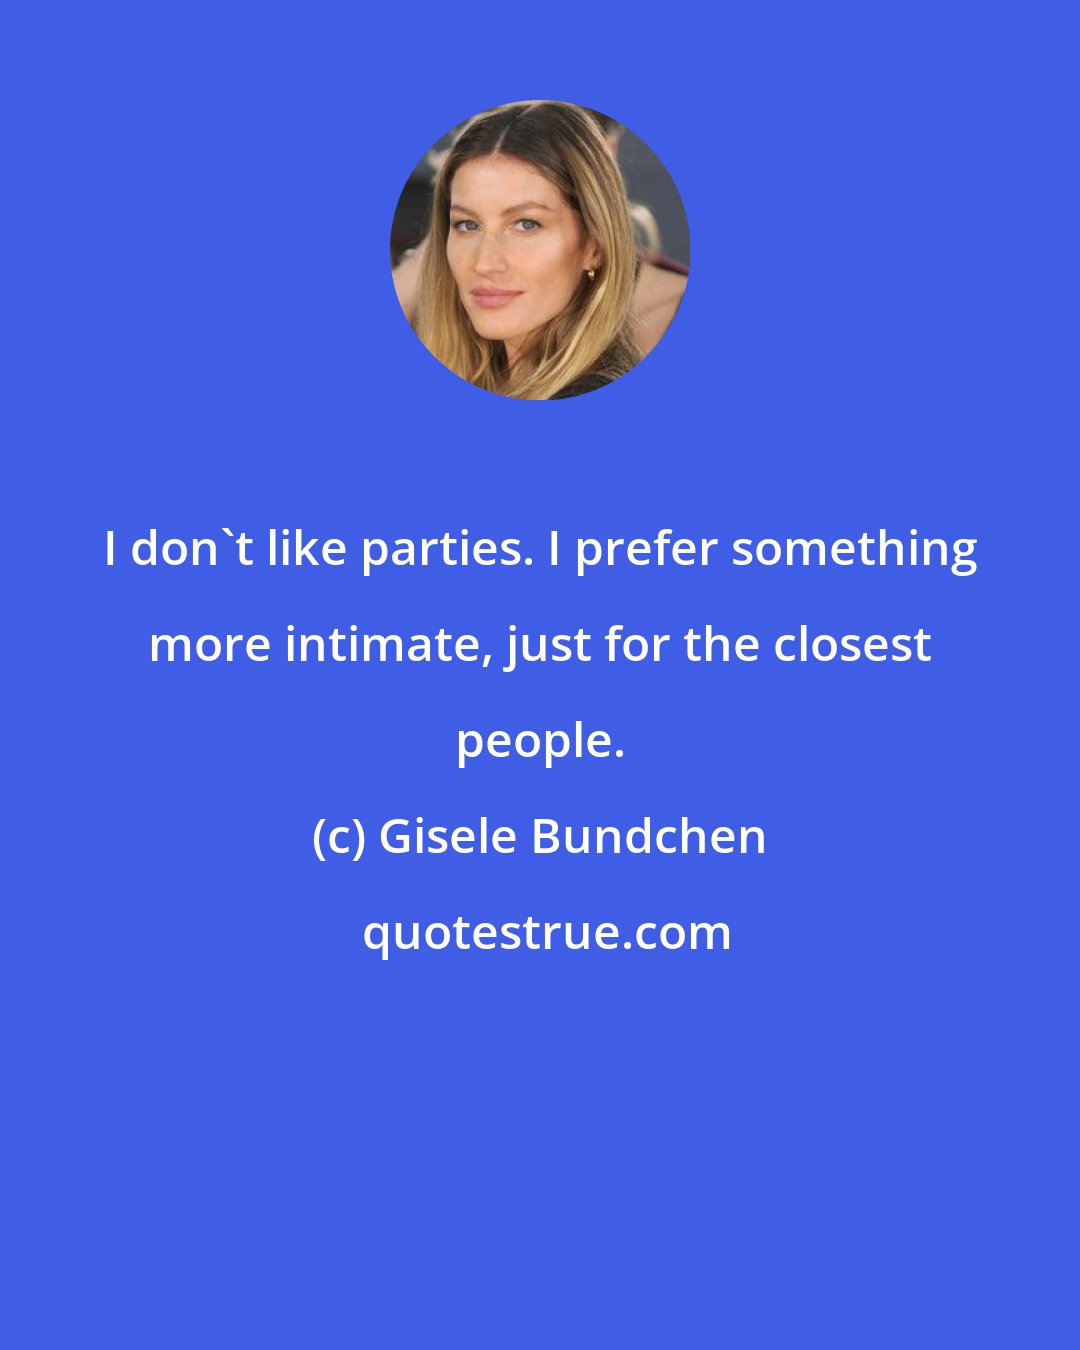 Gisele Bundchen: I don't like parties. I prefer something more intimate, just for the closest people.